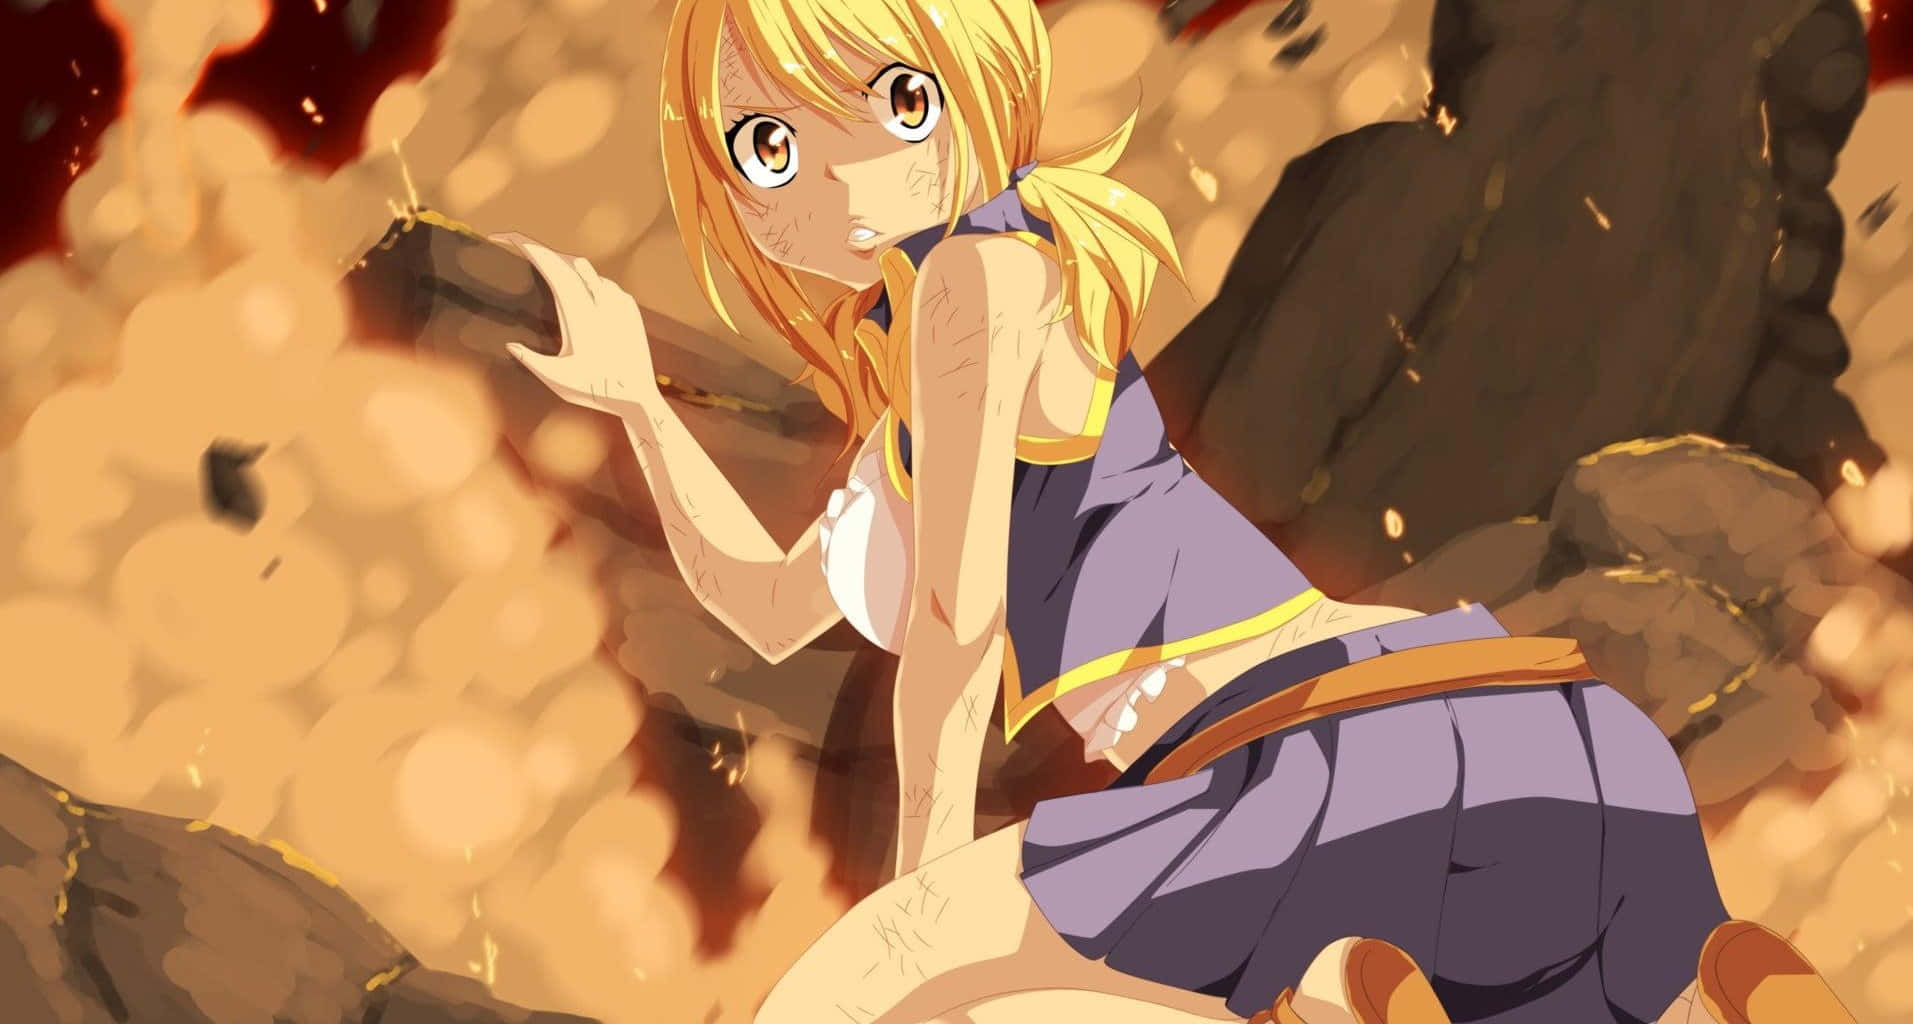 Enchanting Lucy Heartfilia From Fairy Tail Background